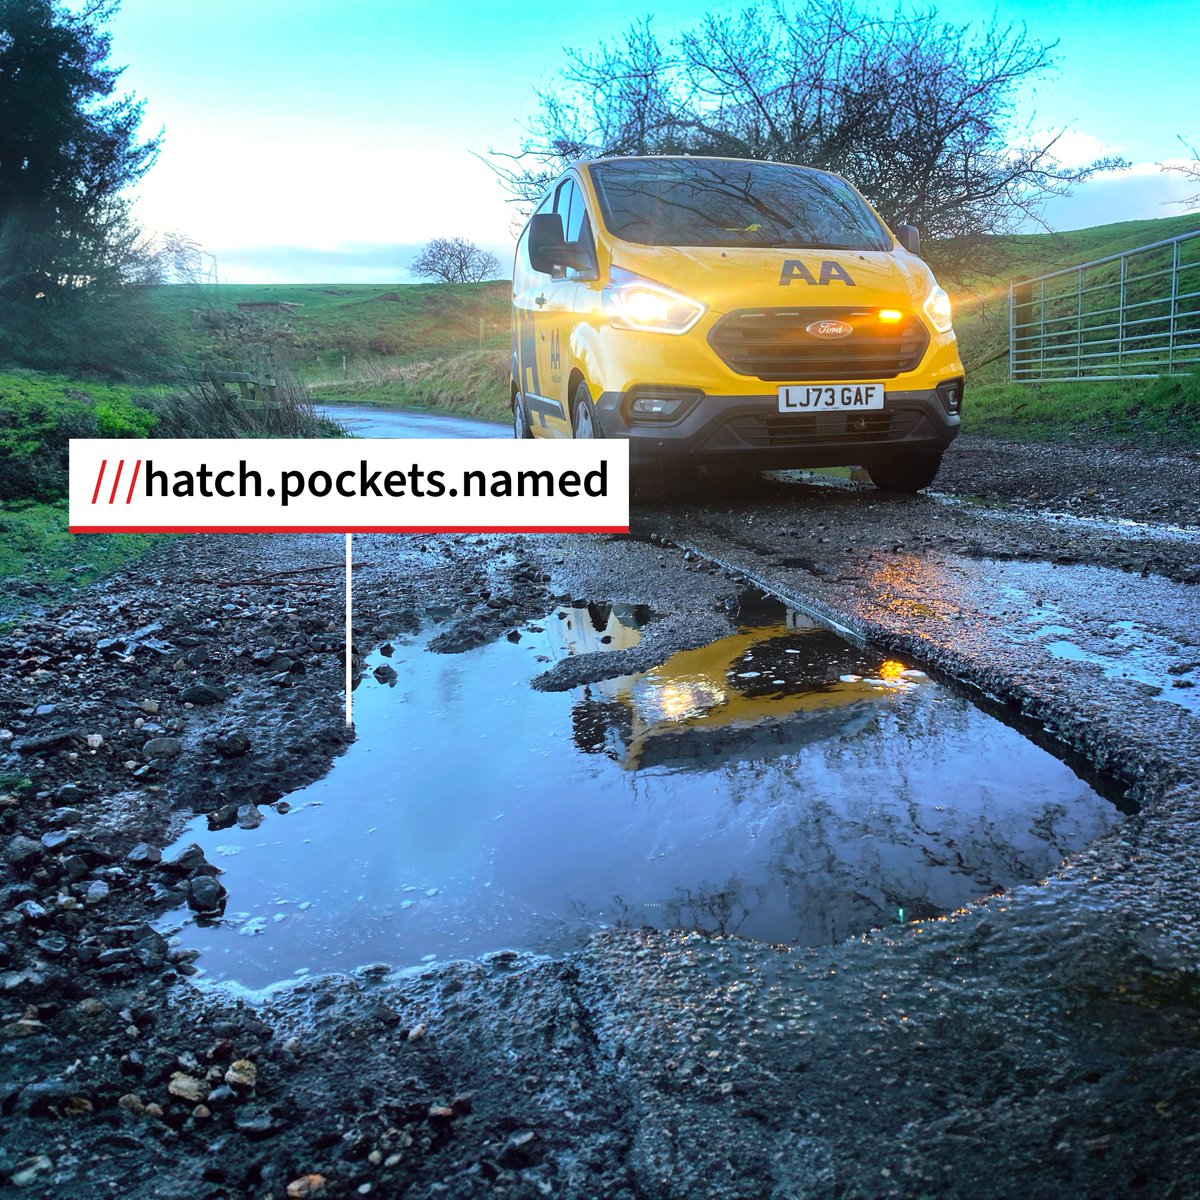 Tired of dodging potholes? You're not alone. In just 3 months, @TheAA_UK's patrols attended over 181,000 pothole-related incidents! Also, 40% of UK adults wouldn’t know how to describe their location! Use what3words to report #potholes to your local council.